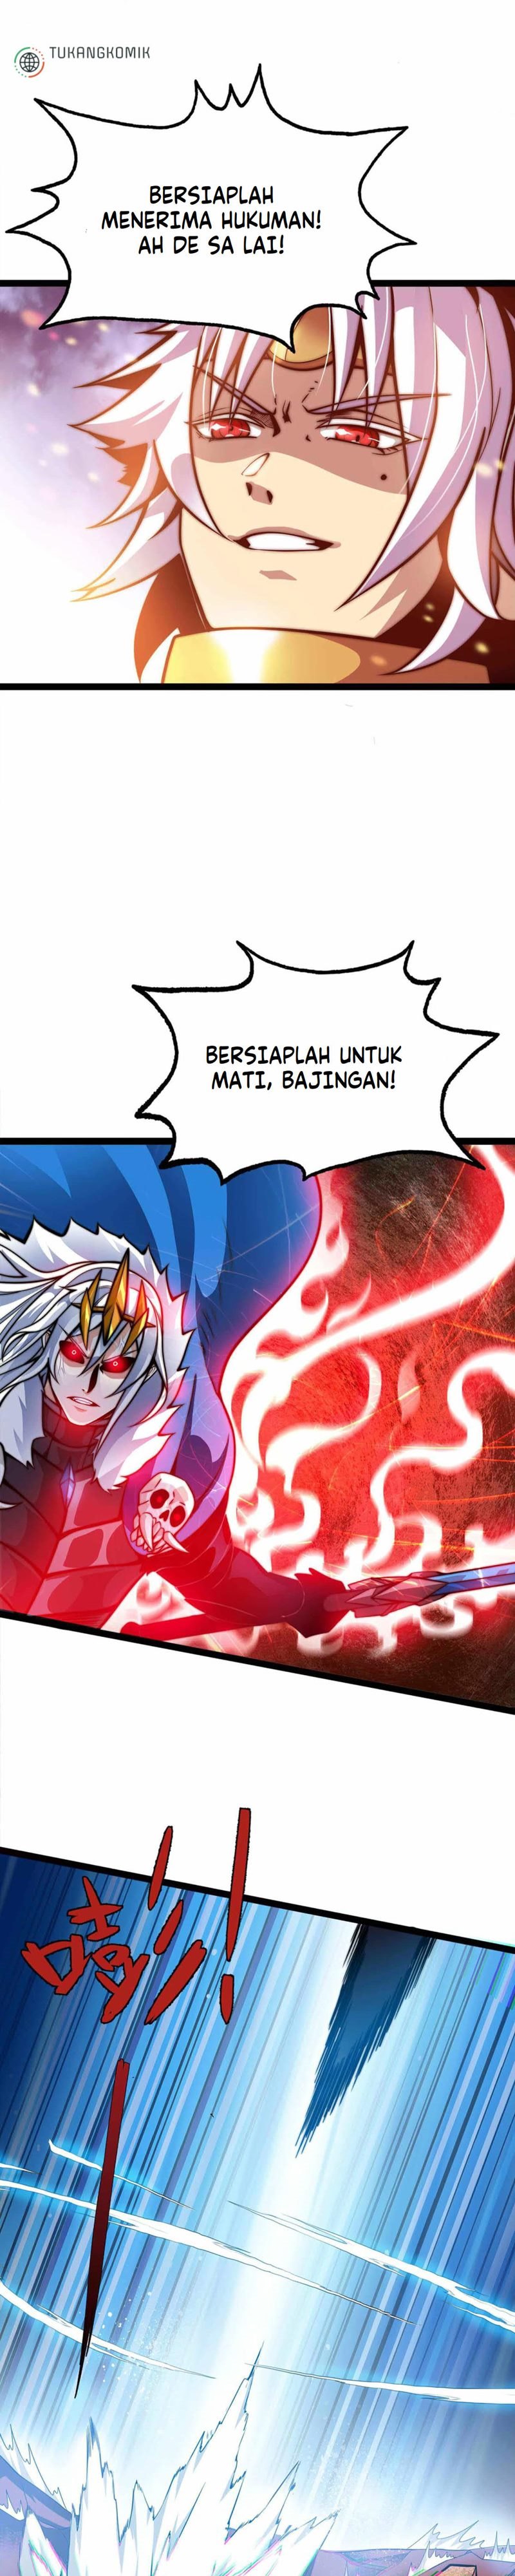 Demon King Cheat System Chapter 01 19